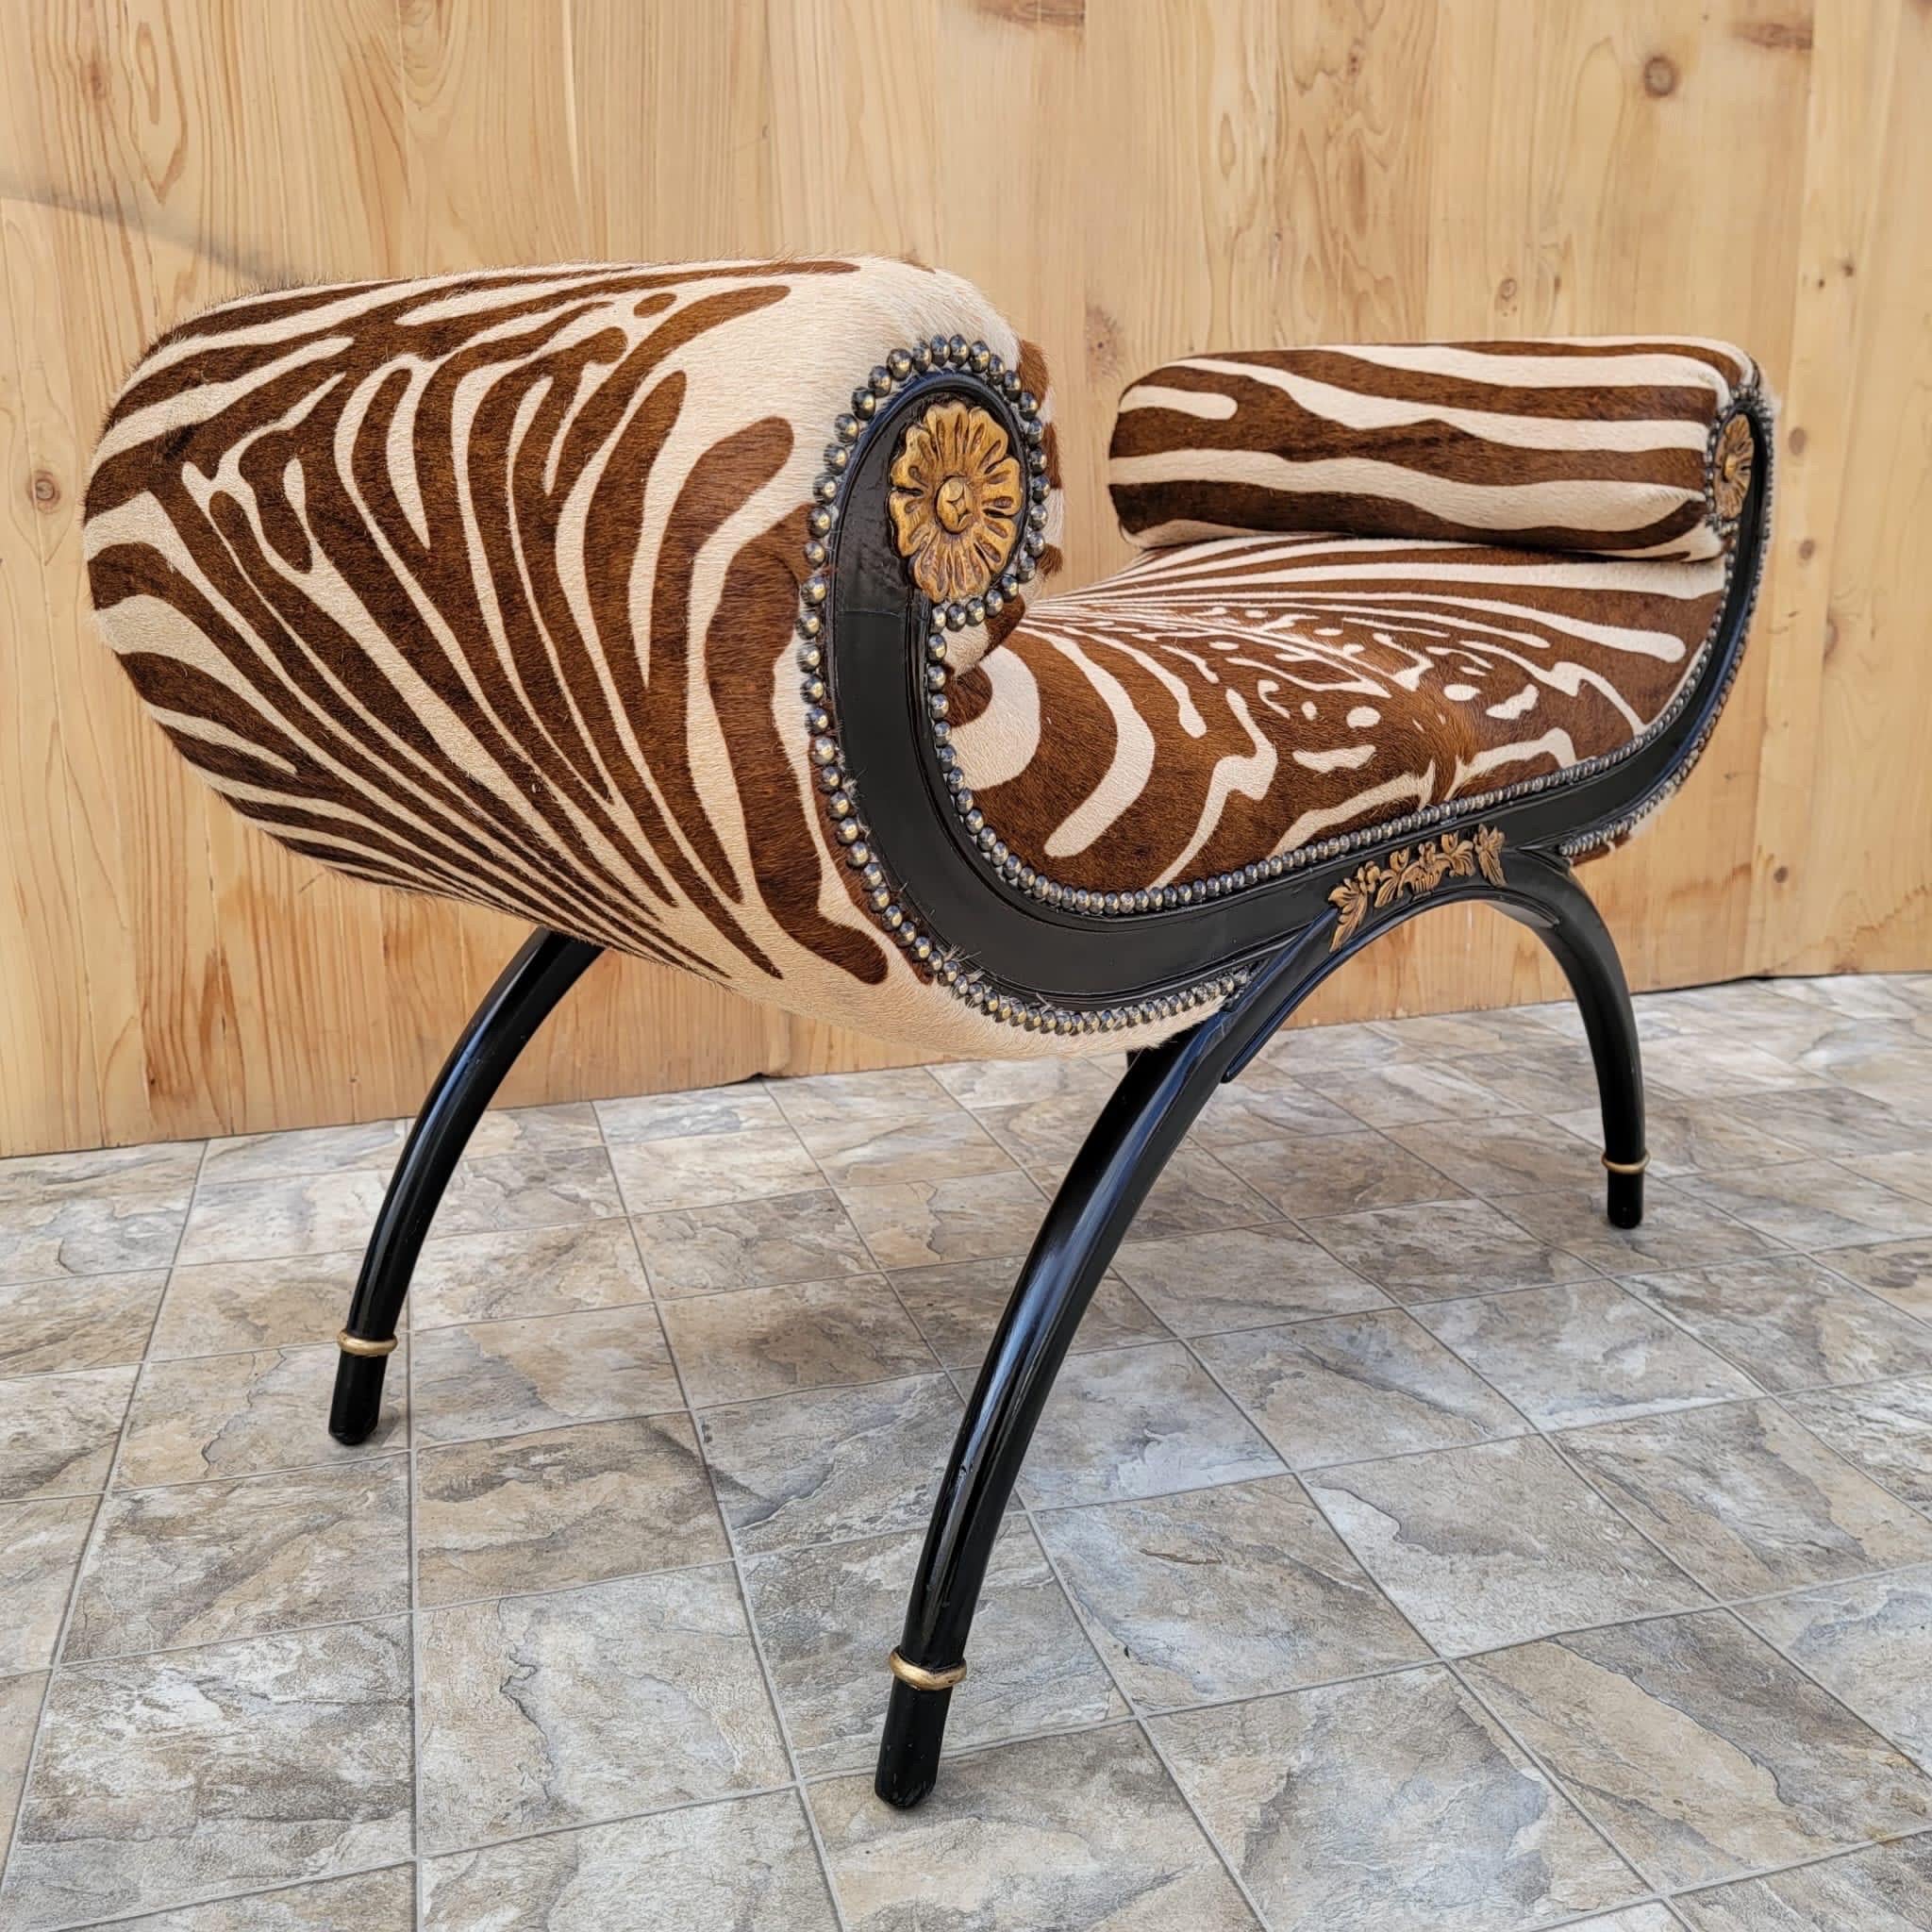 Regency Style Ebonized and Gilded Wood Scroll-Arm Zebra Striped Cowhide Bench In Good Condition For Sale In Chicago, IL